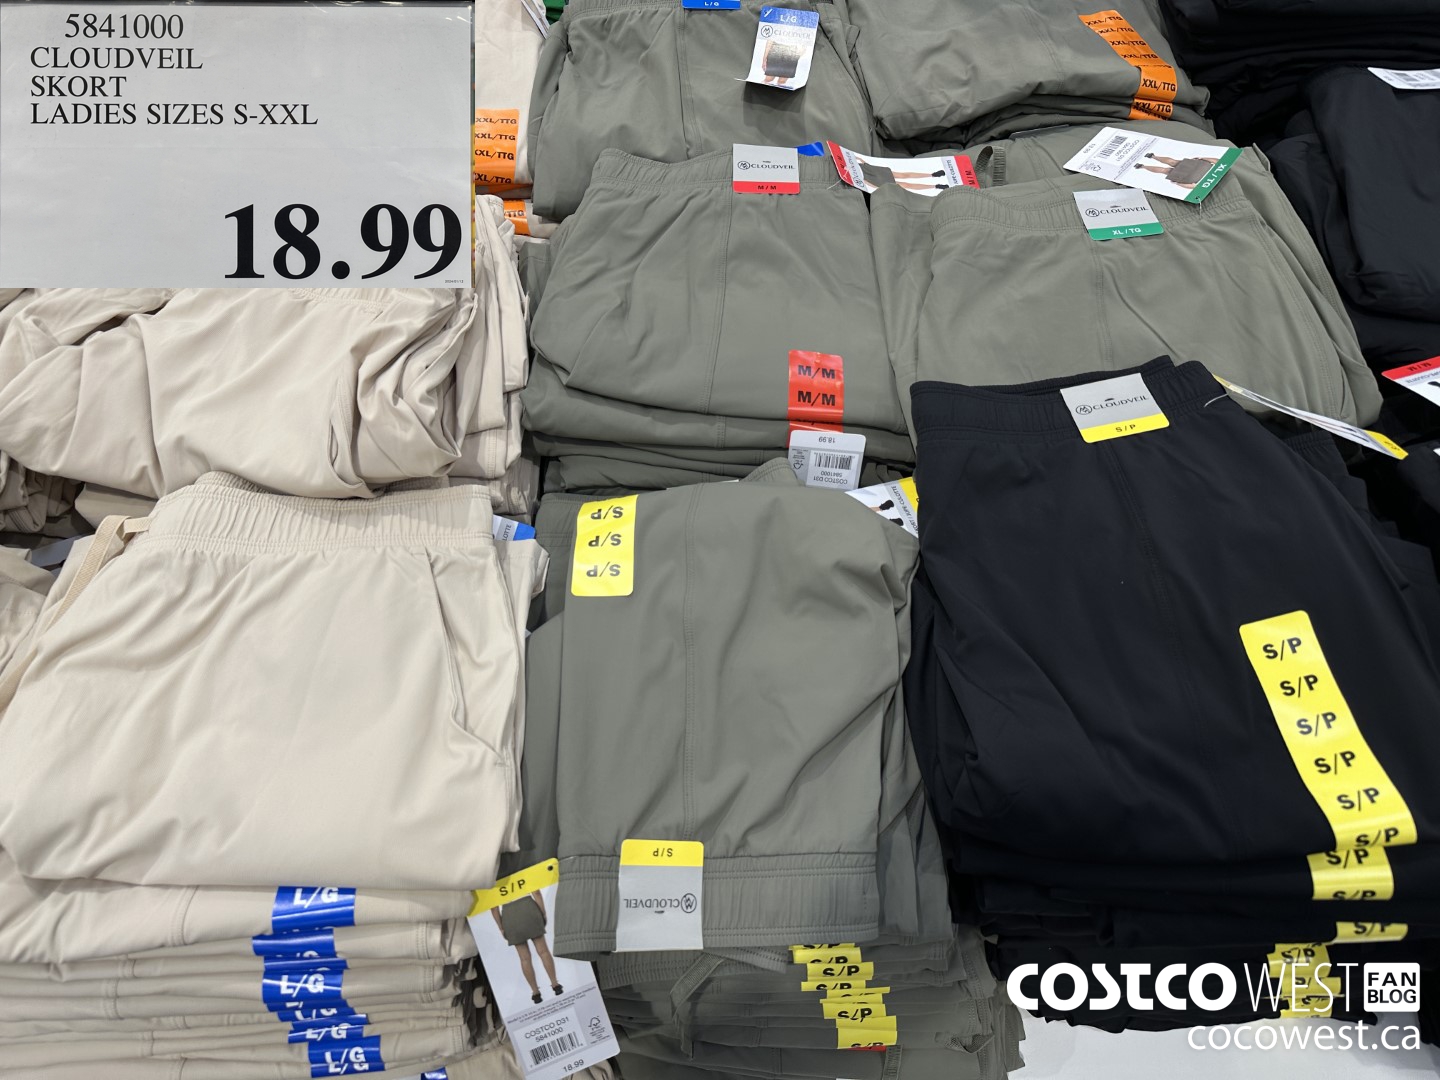 Costco Winter 2023 Superpost – The Entire Clothing Section! - Costco West  Fan Blog